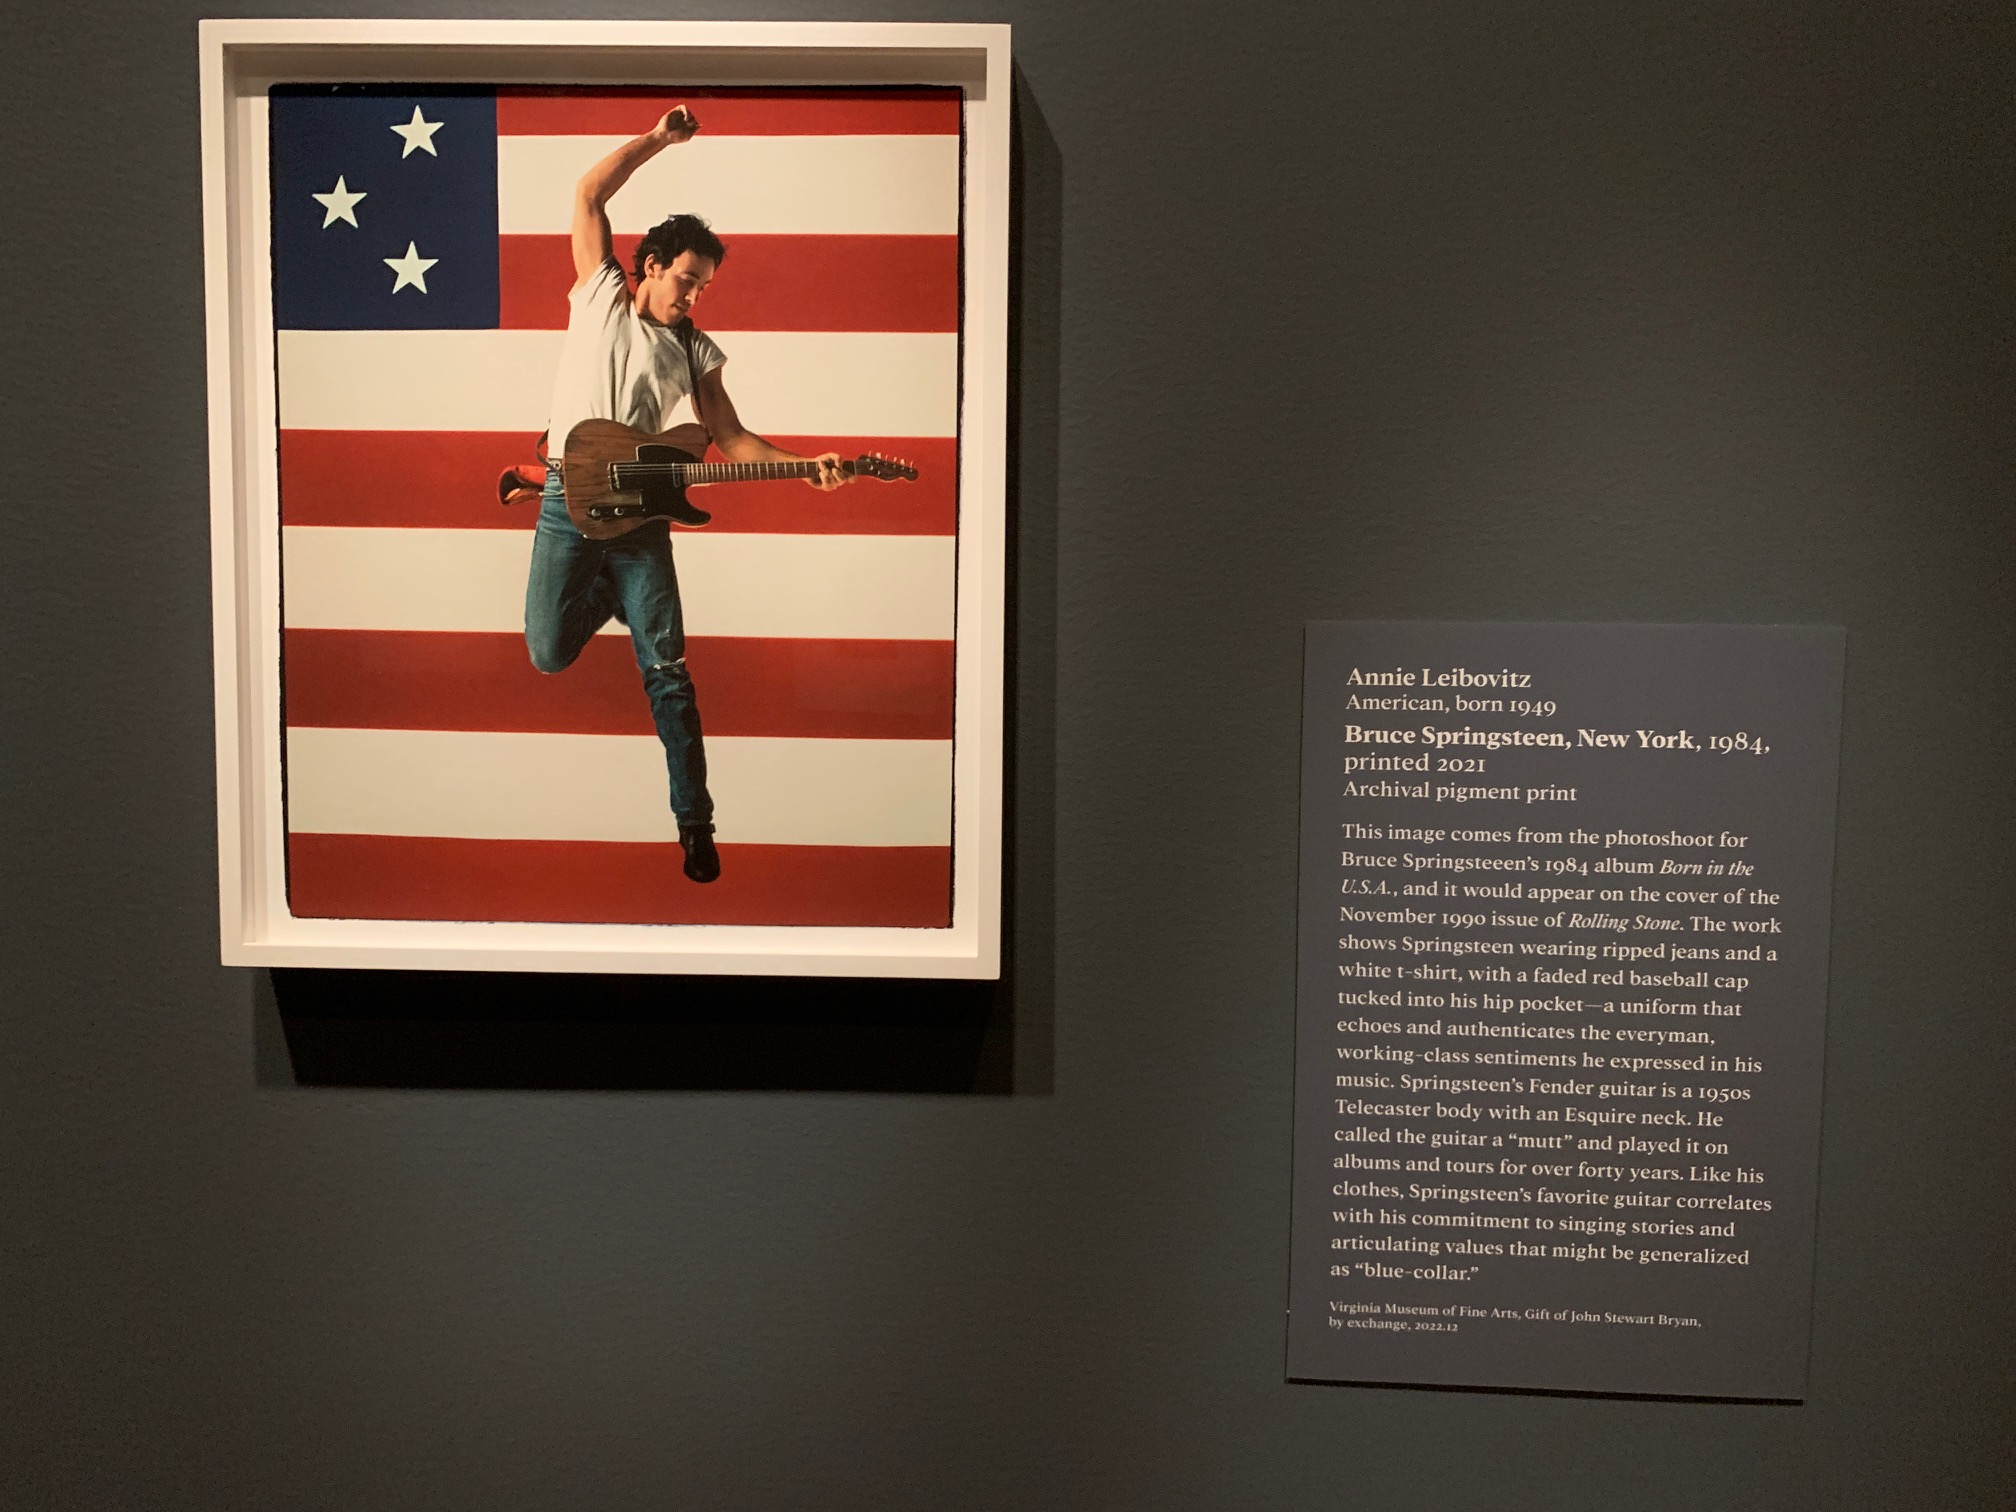 Annie Leibovitz, archival pigment print, “Bruce Springsteen, New York,” 1984. Part of the "Storied Strings" exhibition at the VMFA, Richmond, VA.